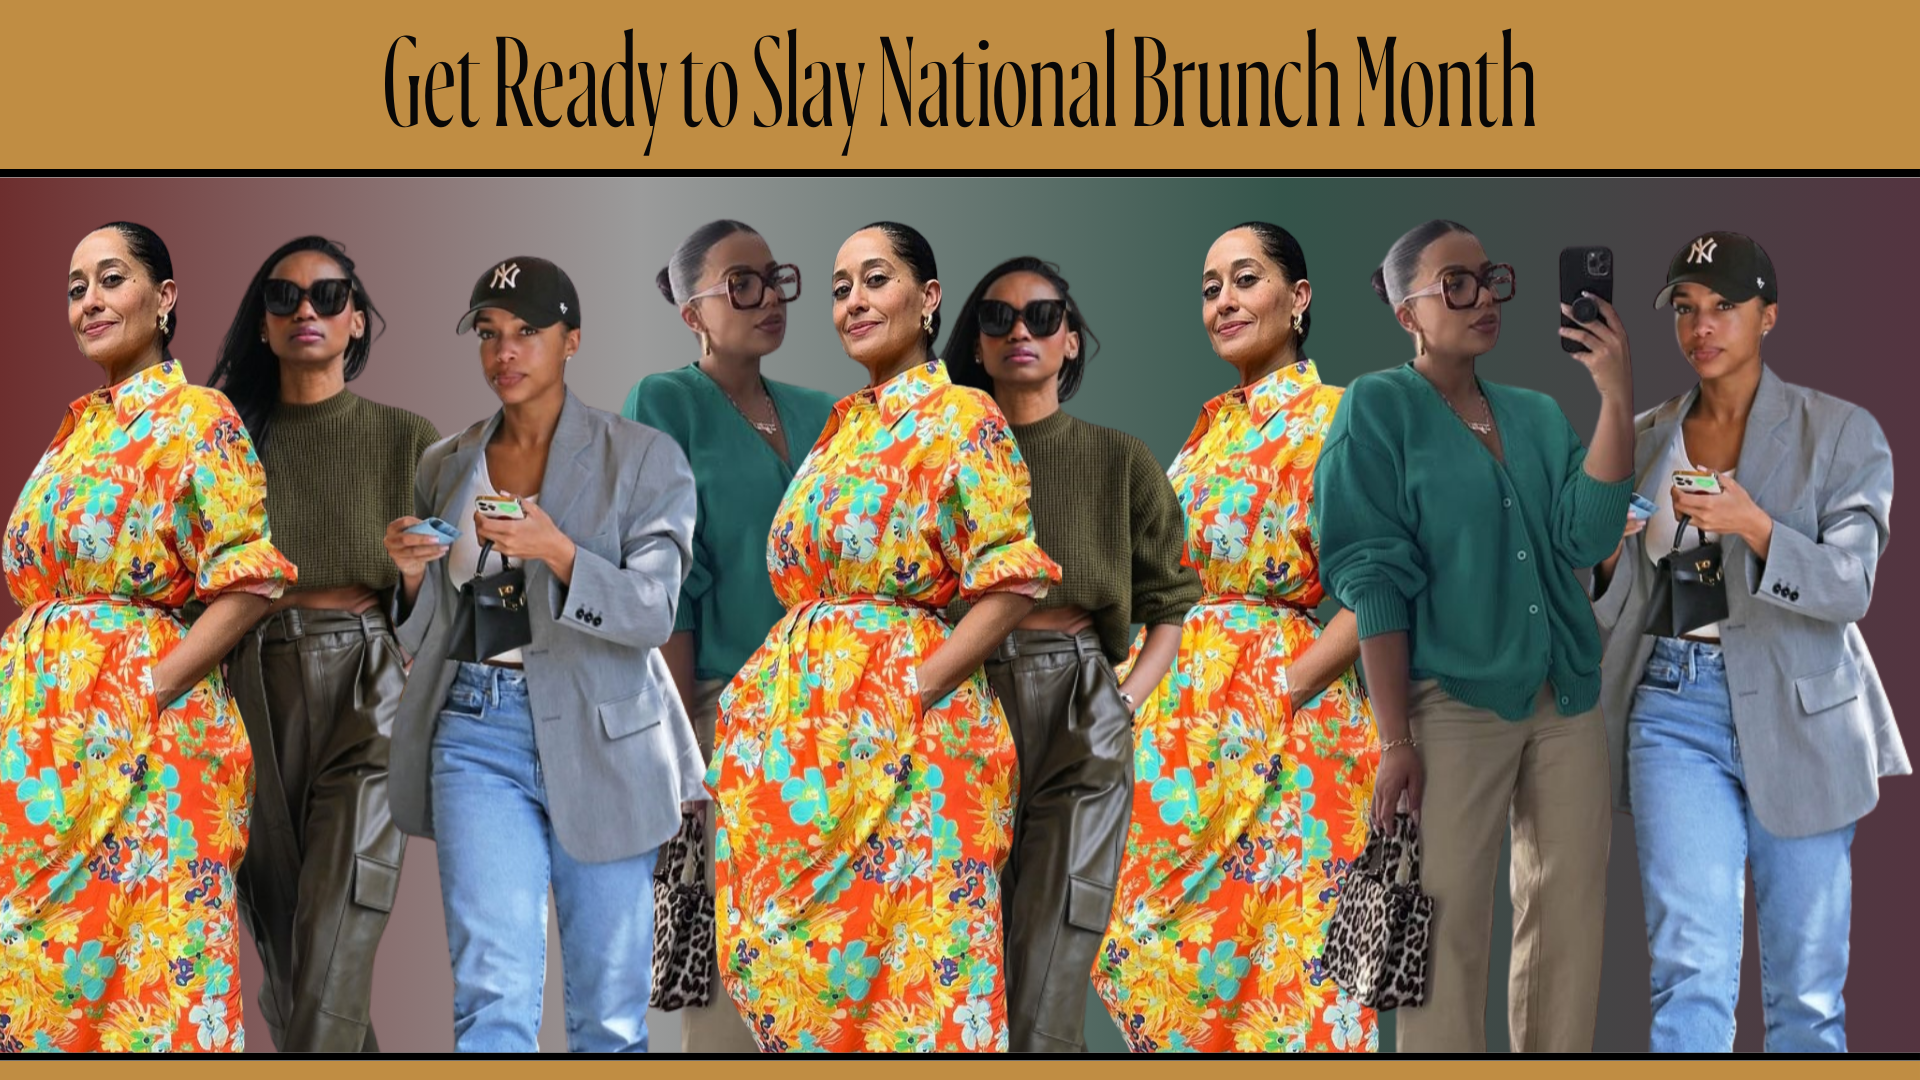 Get Ready to Slay National Brunch Month: Brunching Solo, with Your Crew, or Bae!